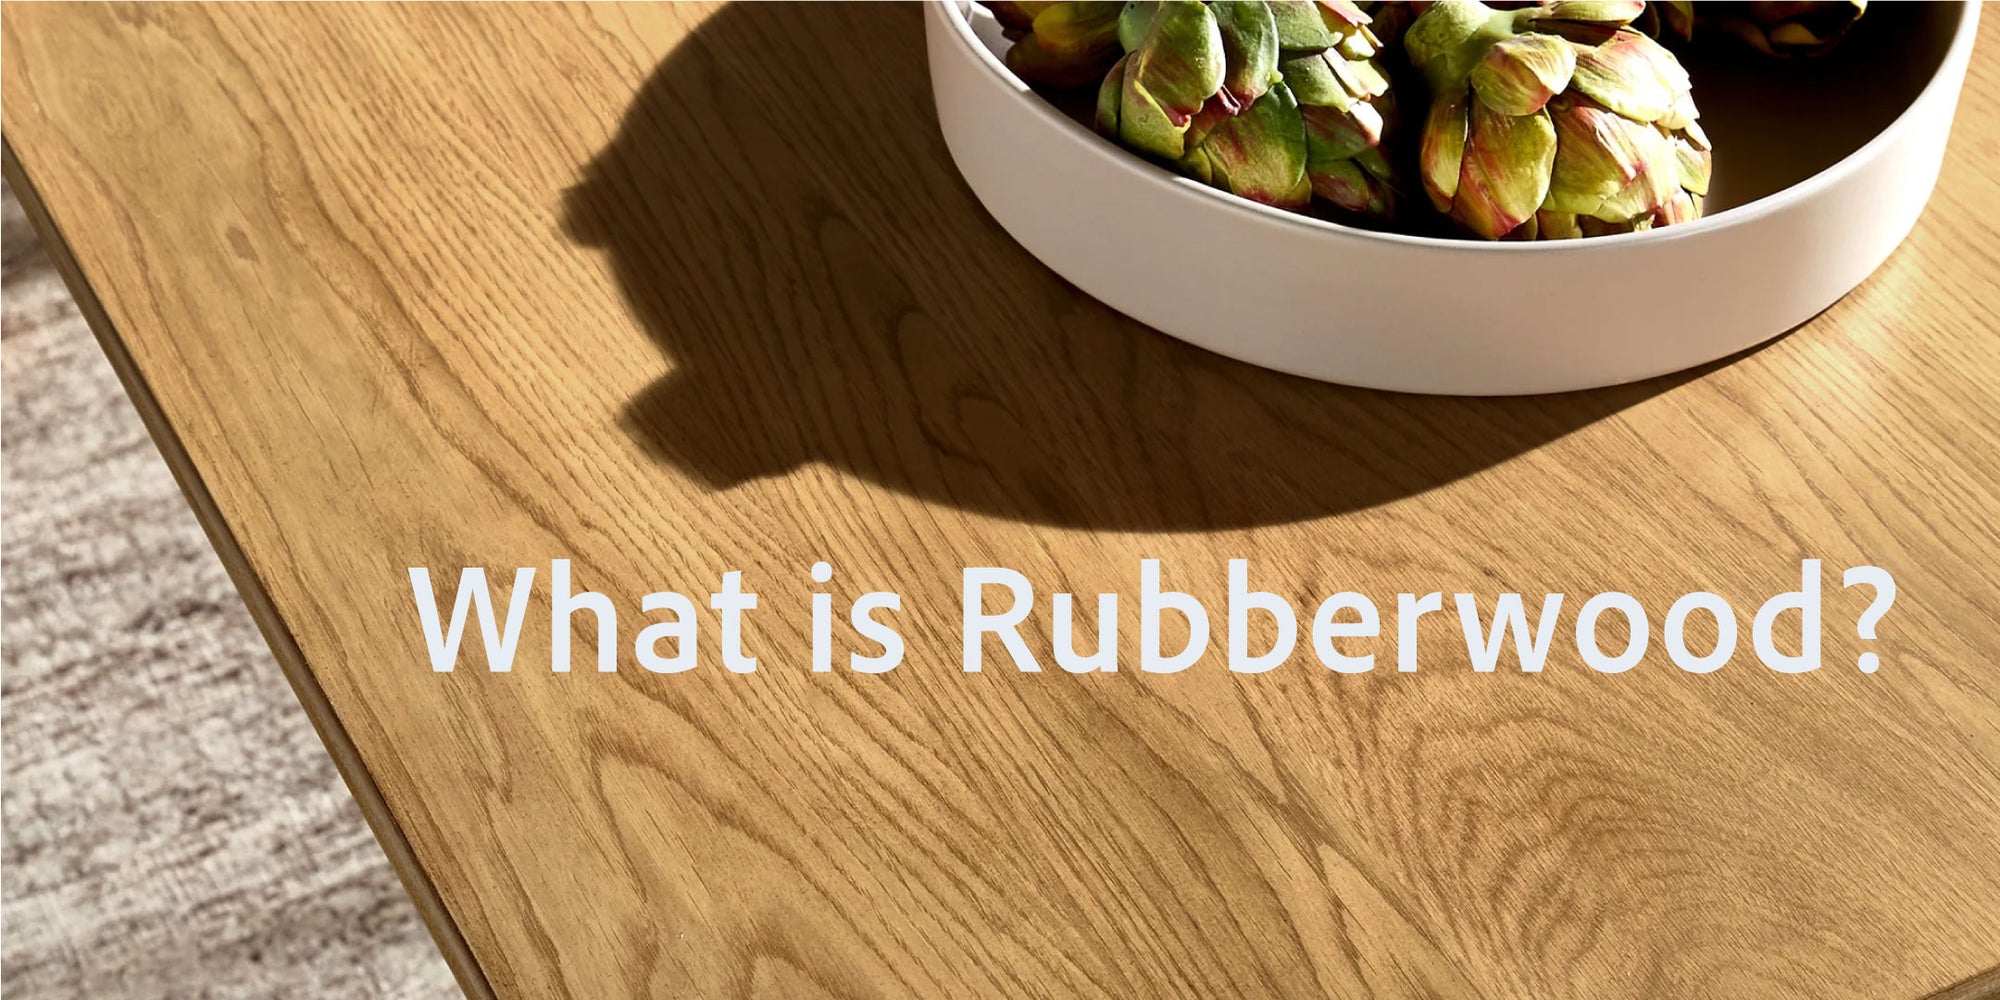 What is Rubberwood? Guide to Its Uses, Pros and Cons